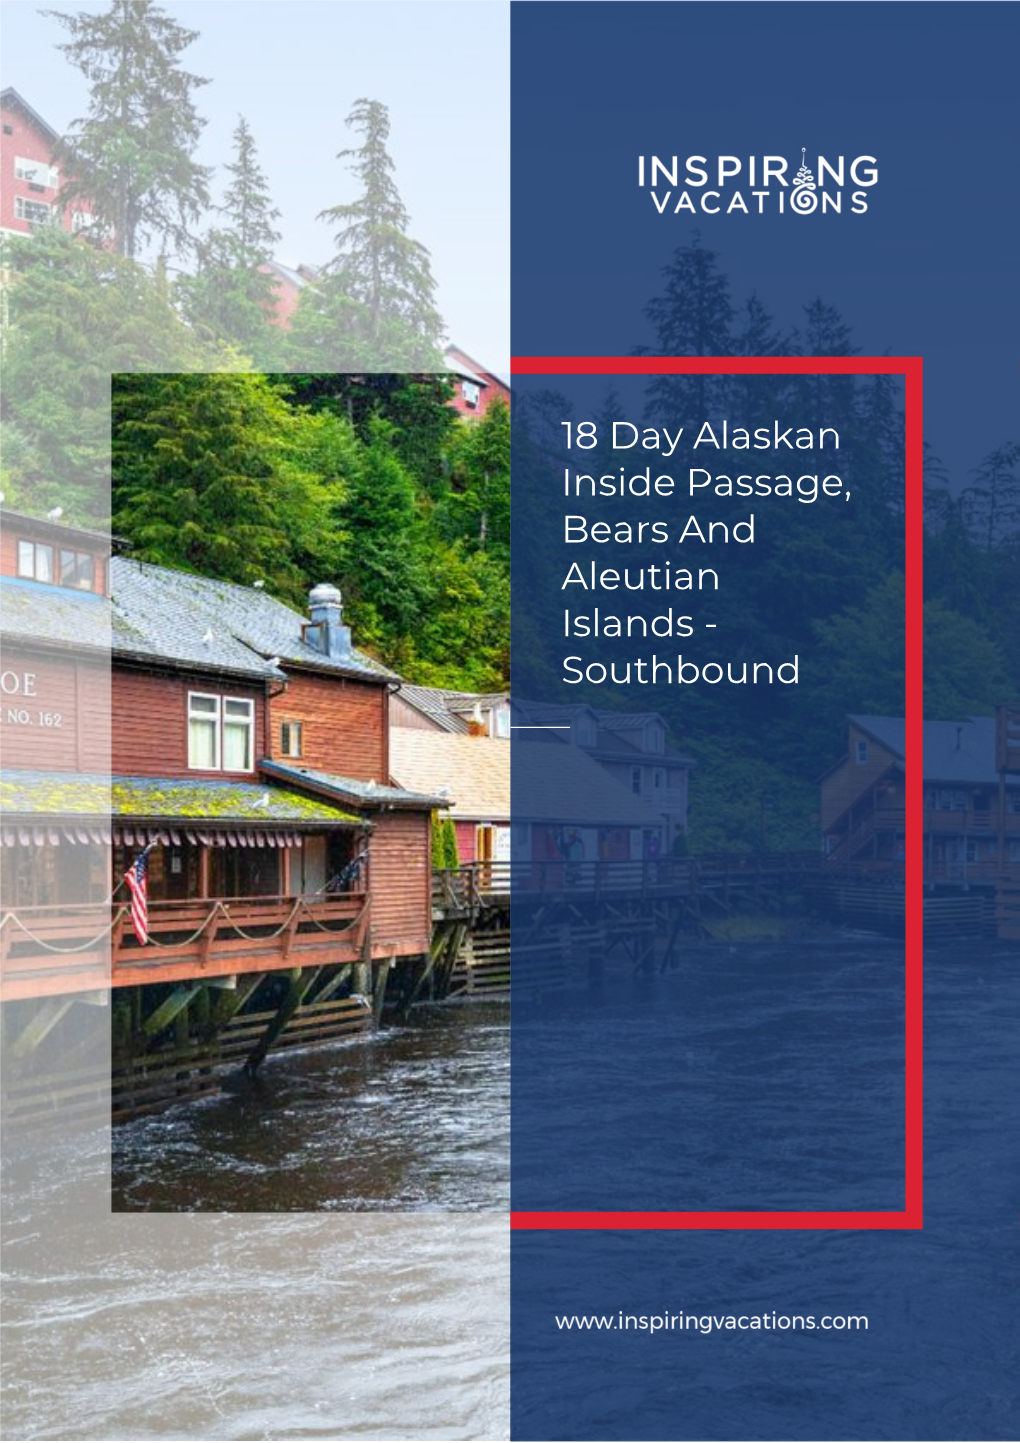 18 Day Alaskan Inside Passage, Bears and Aleutian Islands - Southbound Get Ready to Be Inspired